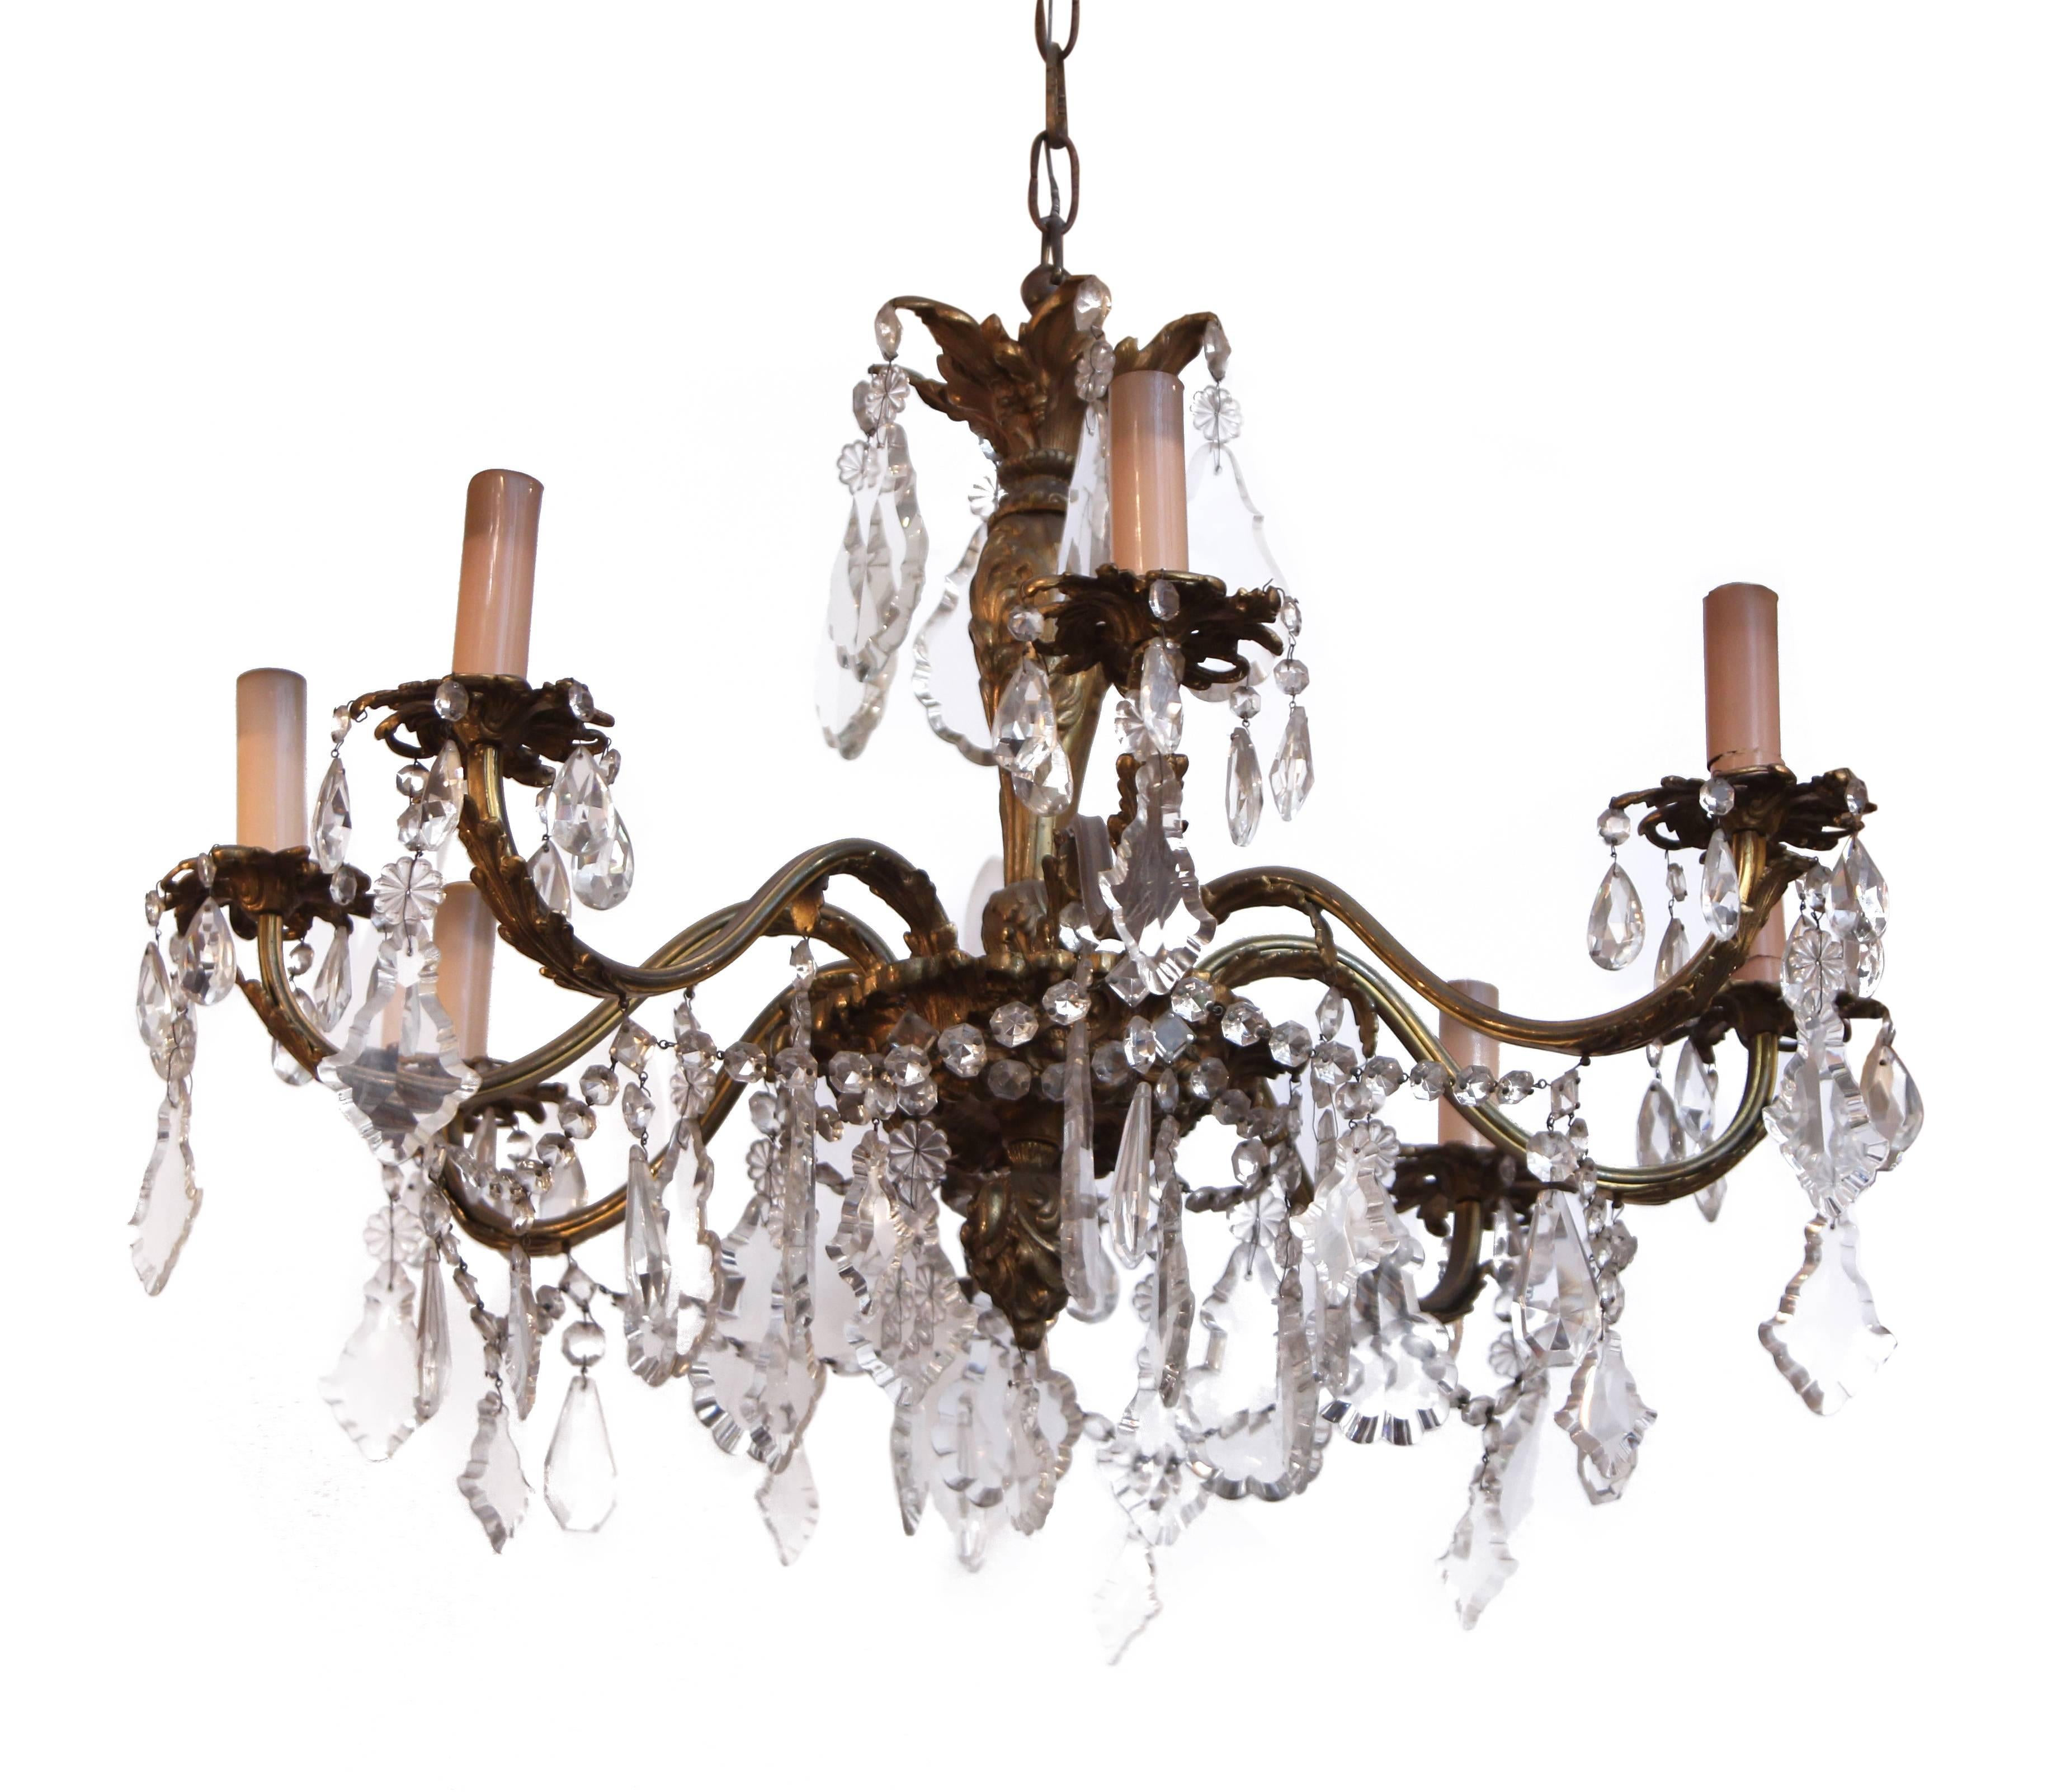 1920s bronze chandelier with eight arms and crystal detailing. This item can be viewed at our 5 East 16th St at Union Square in Manhattan.